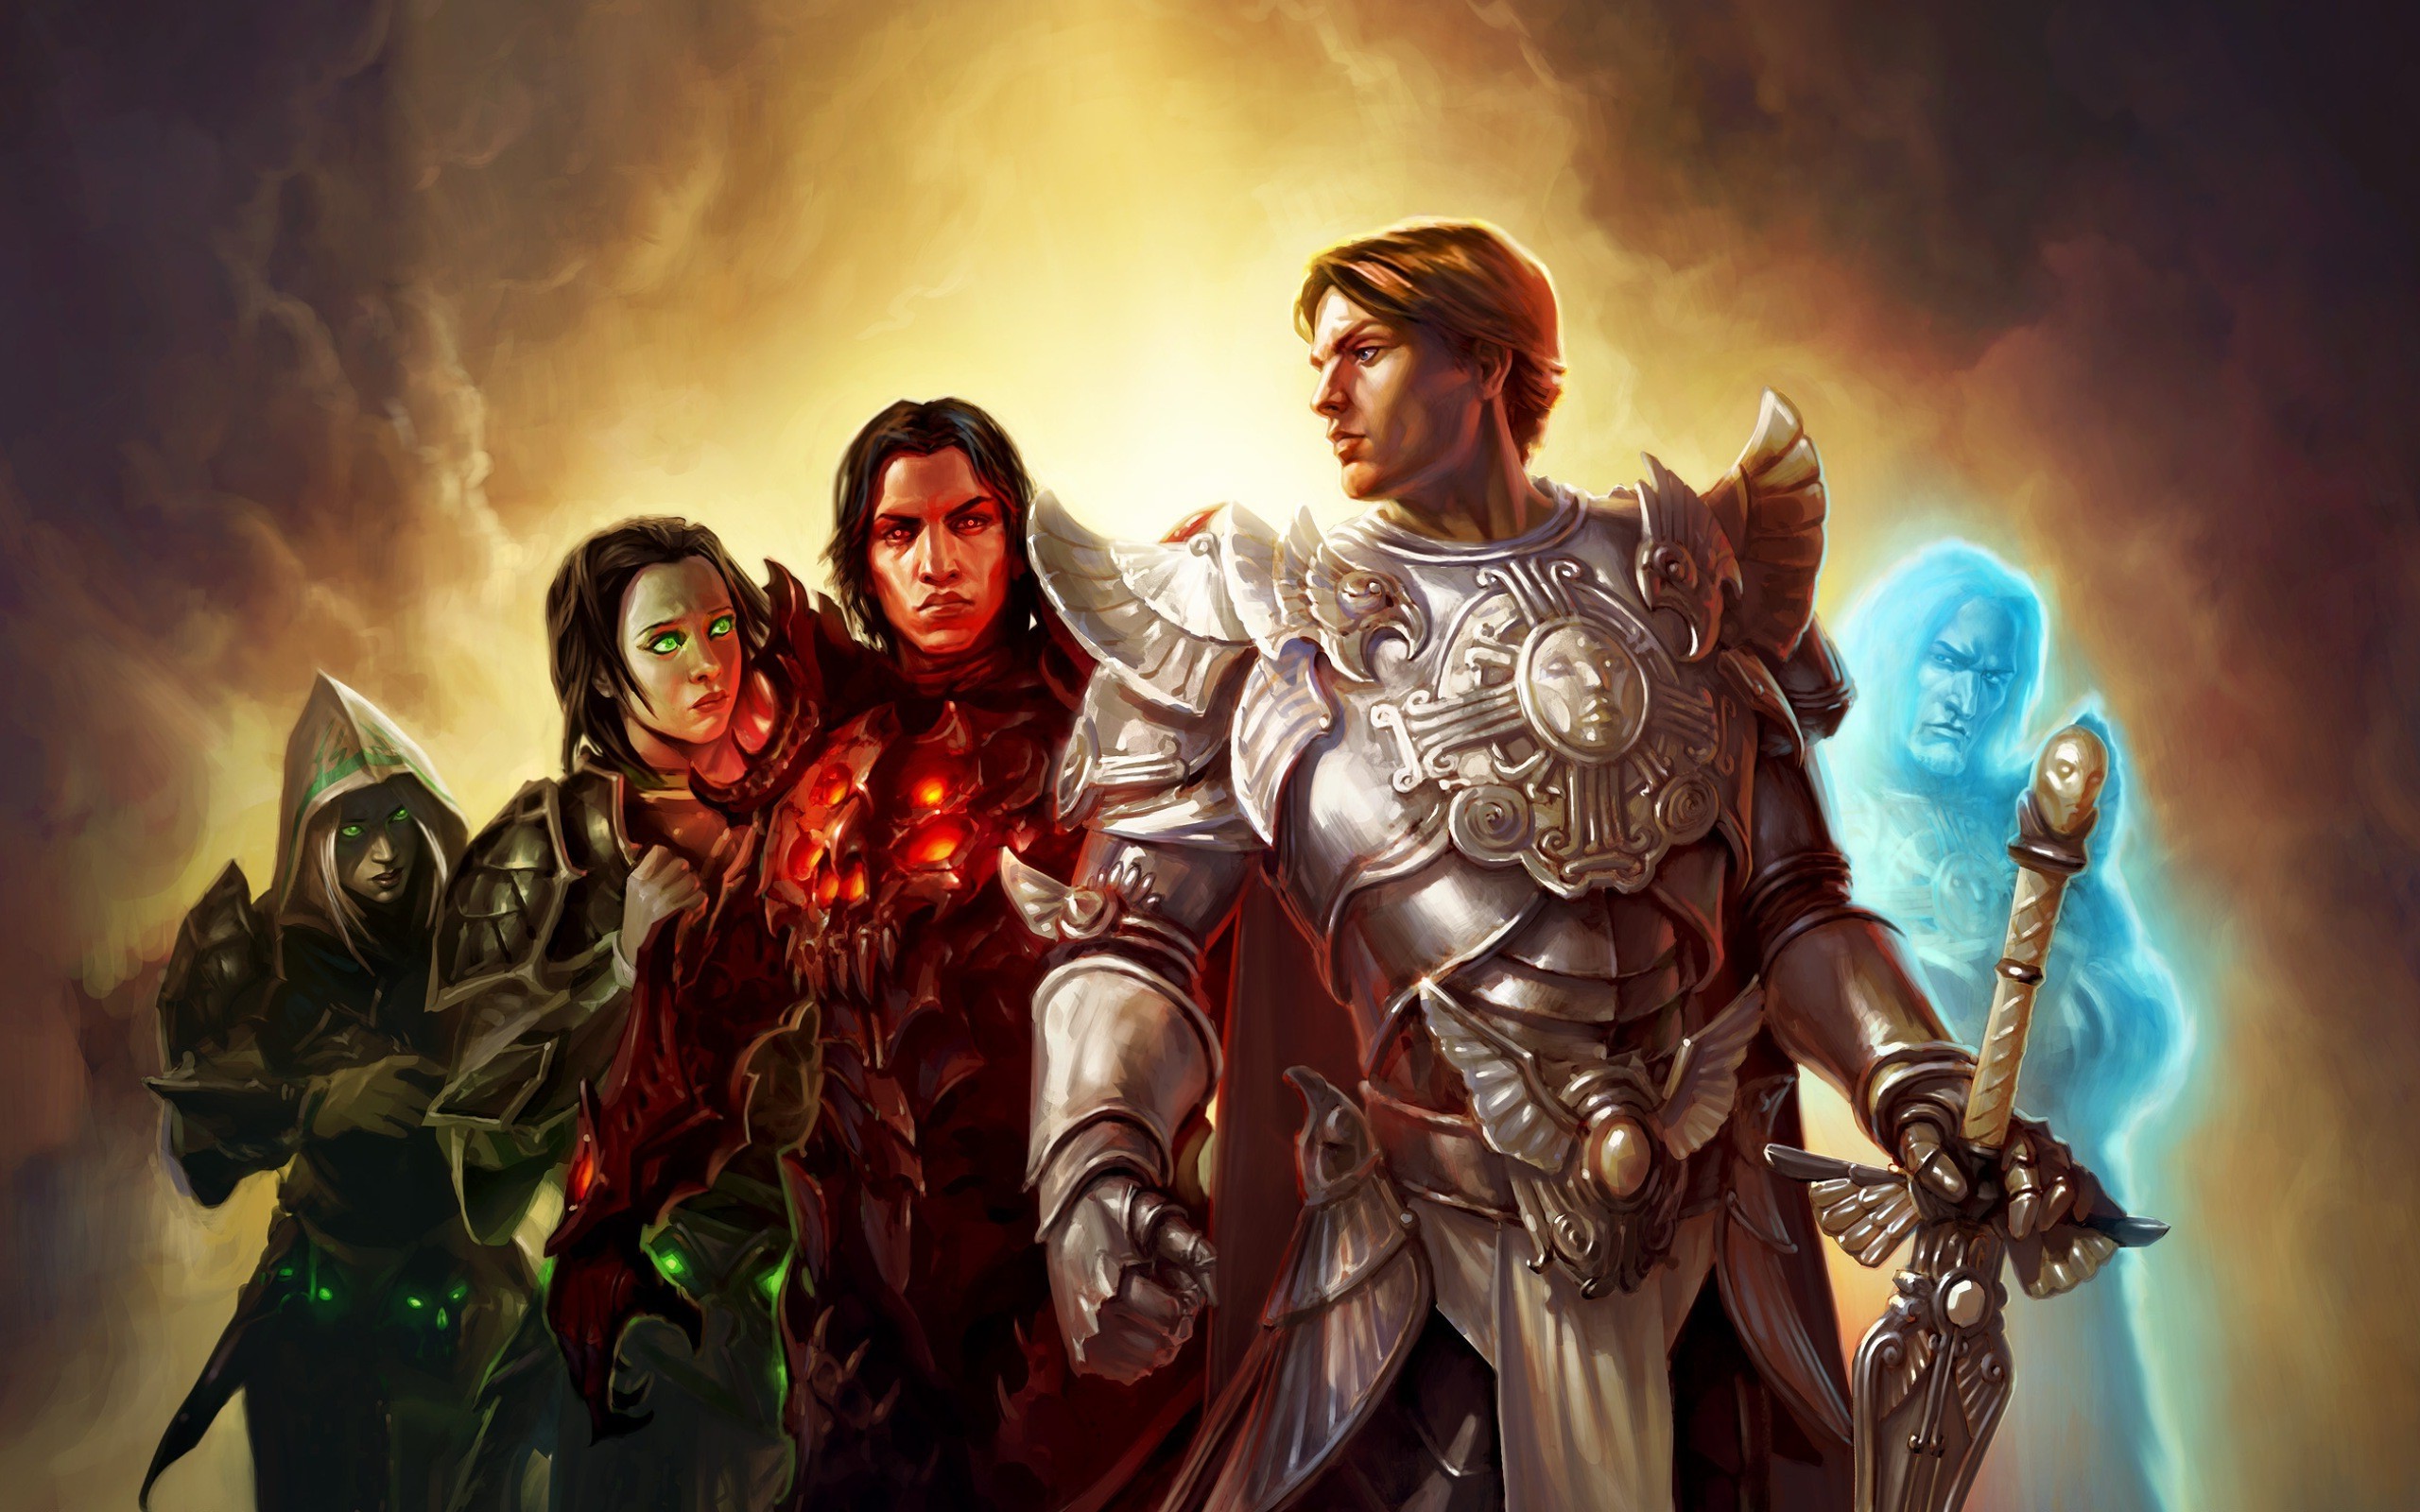 Fantasy Art Video Games Heroes Of Might And Magic Vi